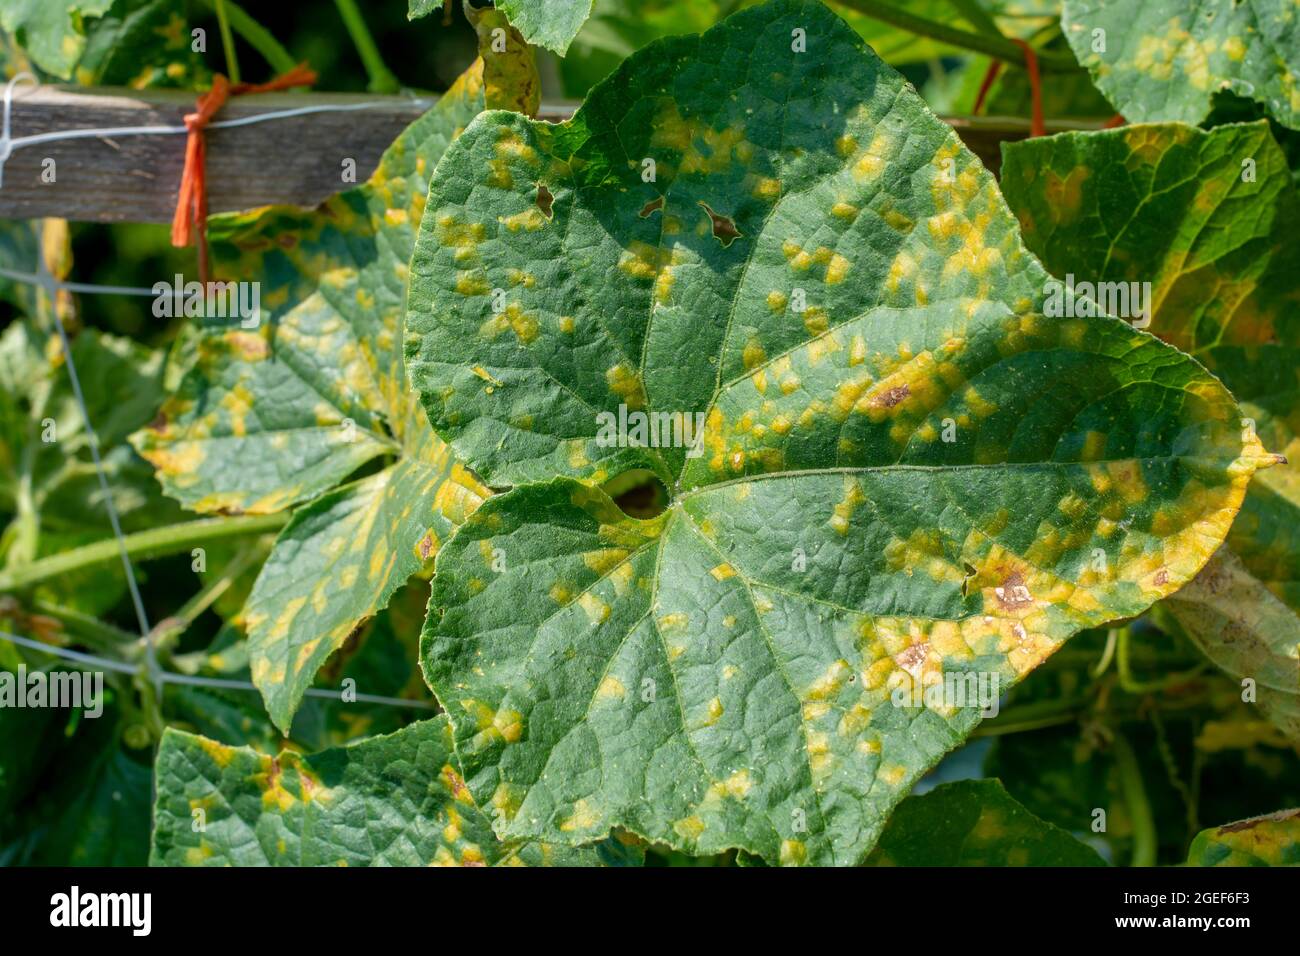 Cucumber leaves infected by downy mildew (Pseudoperonospora cubensis) in the garden. Cucurbits disease. Stock Photo